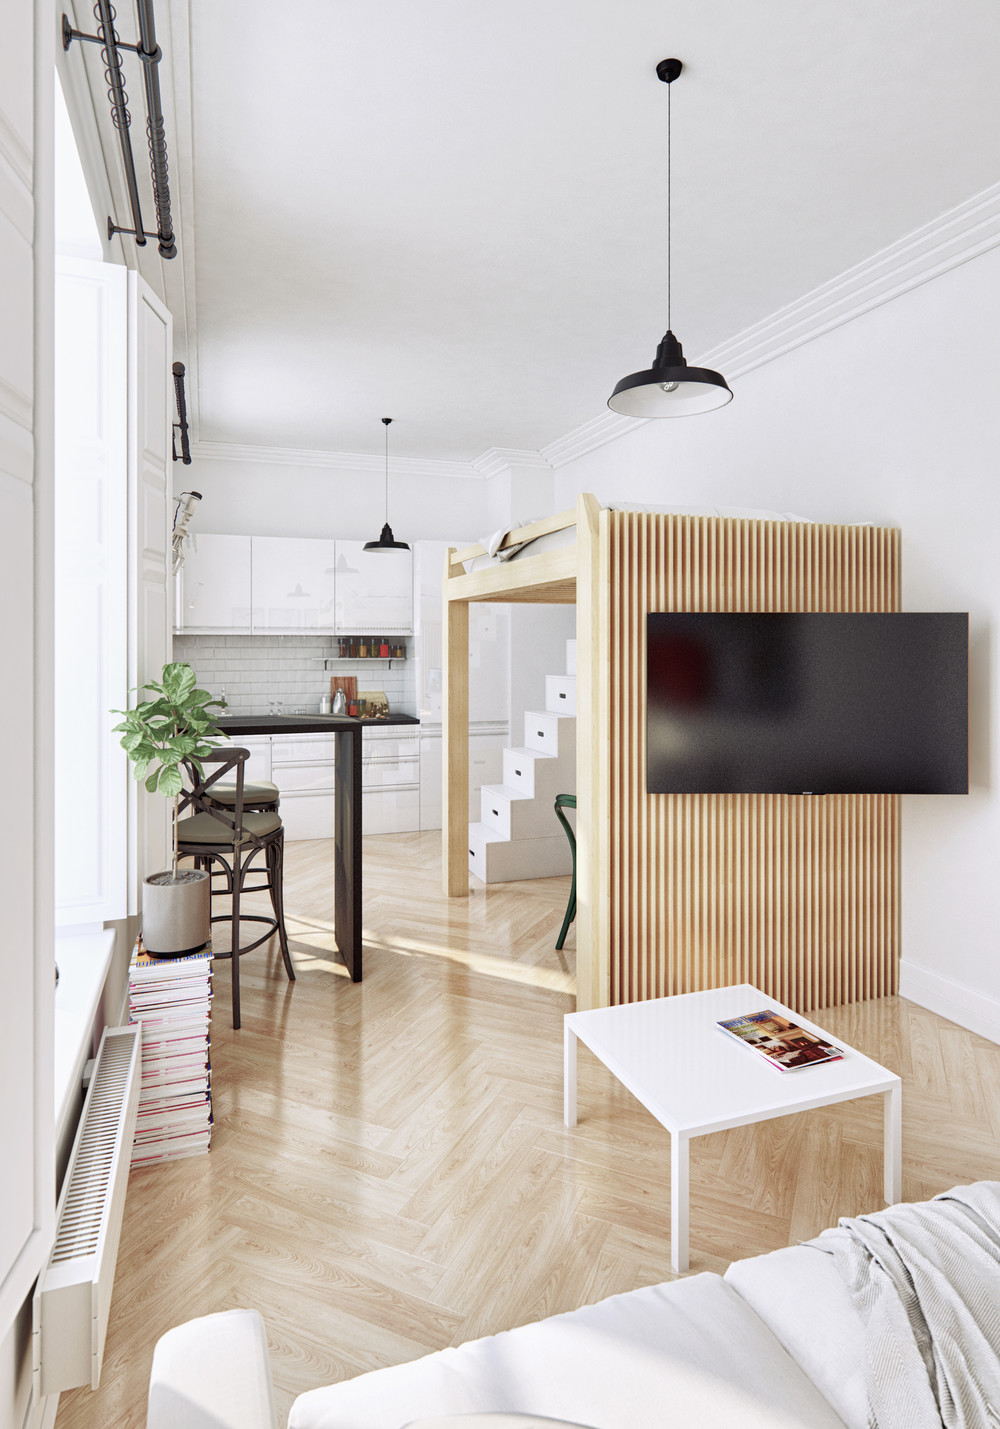 2 Small Apartment with Modern Minimalist Interior Design - RooHome